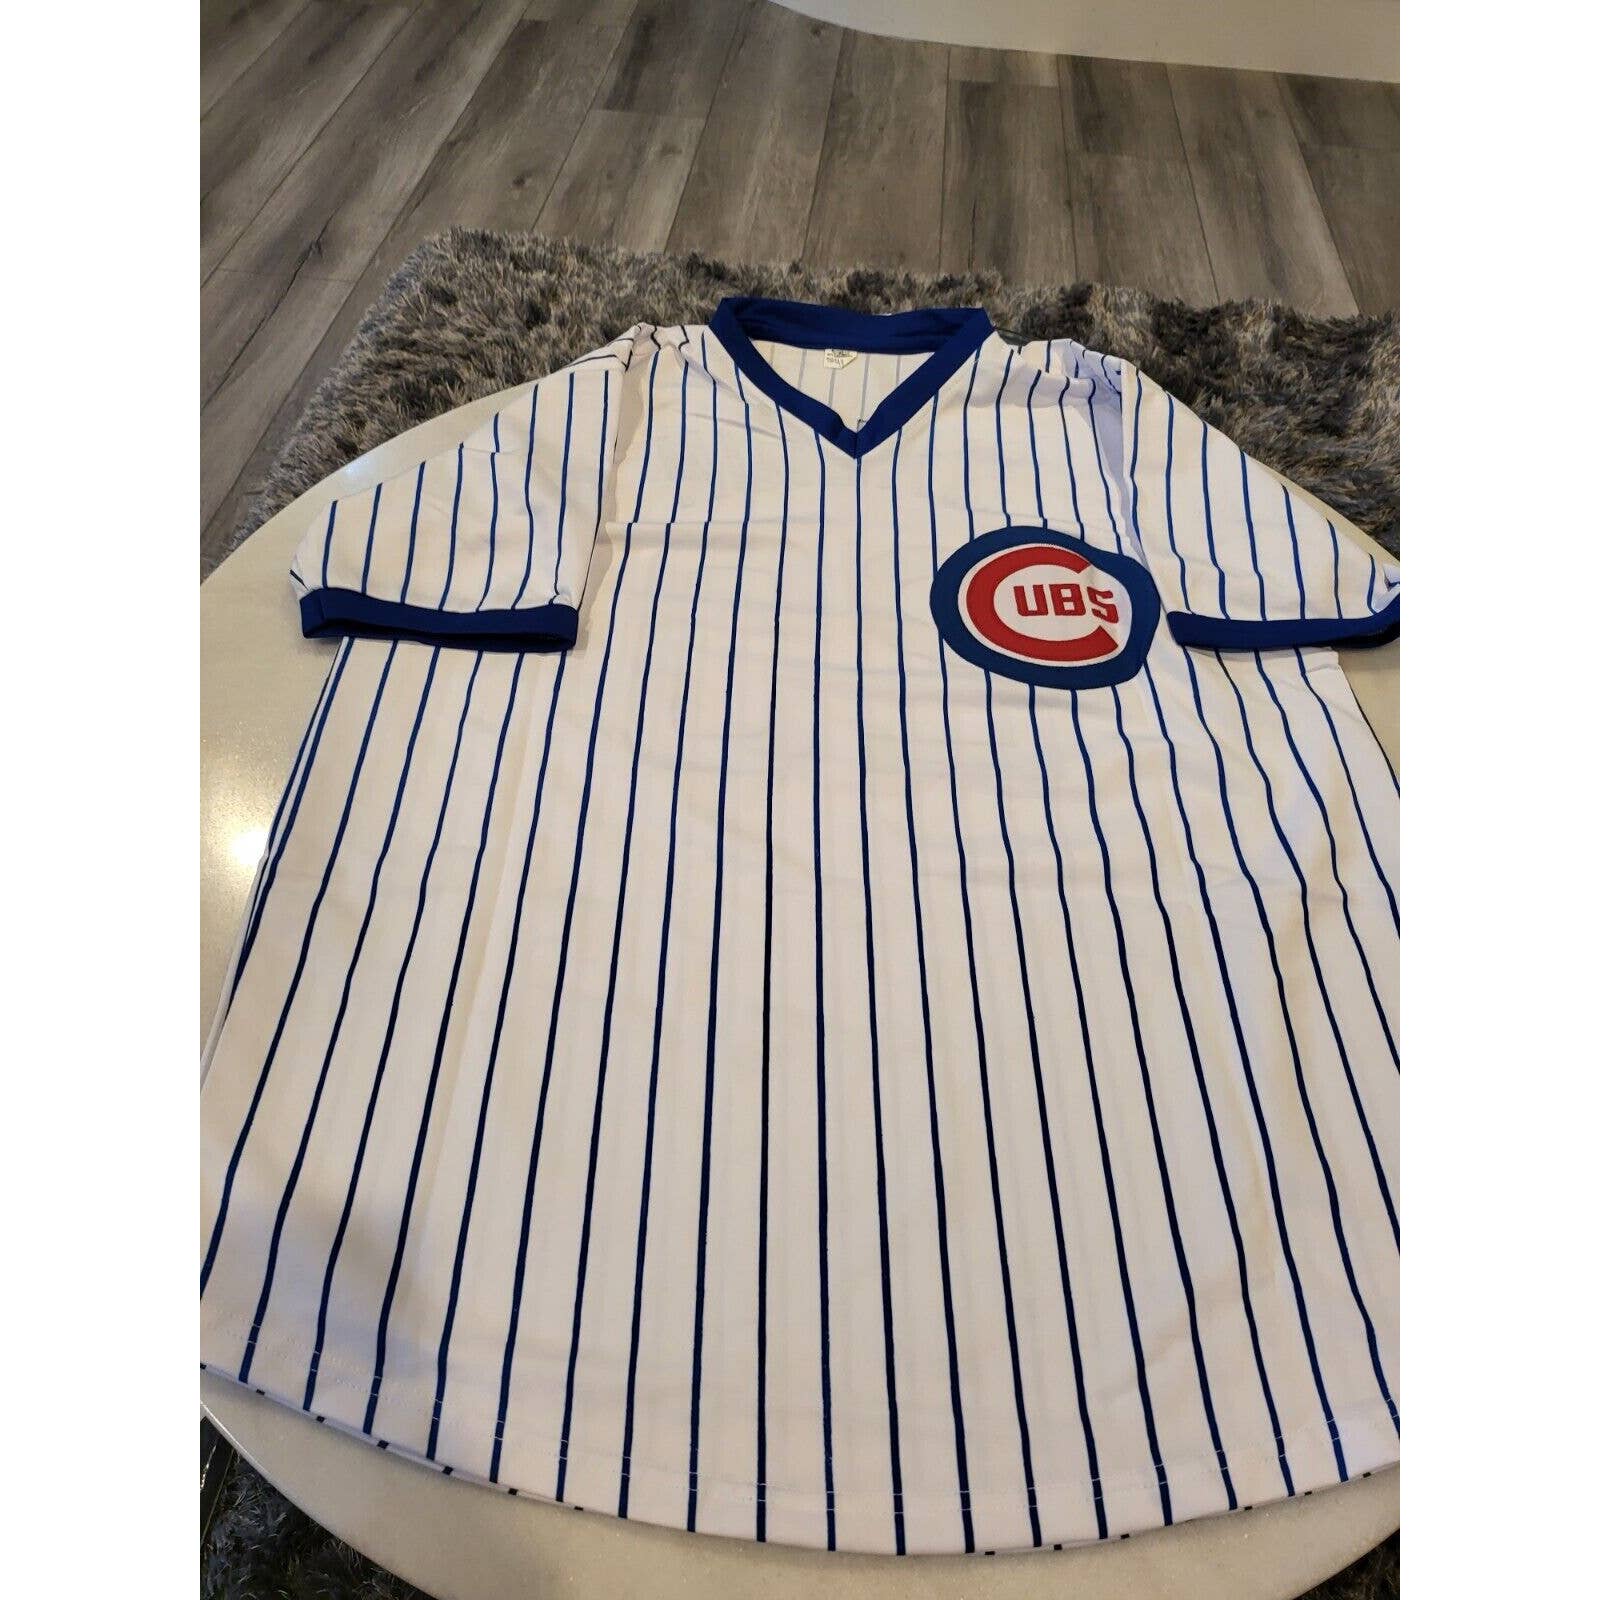 Jerome Walton Autographed/Signed Jersey COA Chicago Cubs - TreasuresEvolved